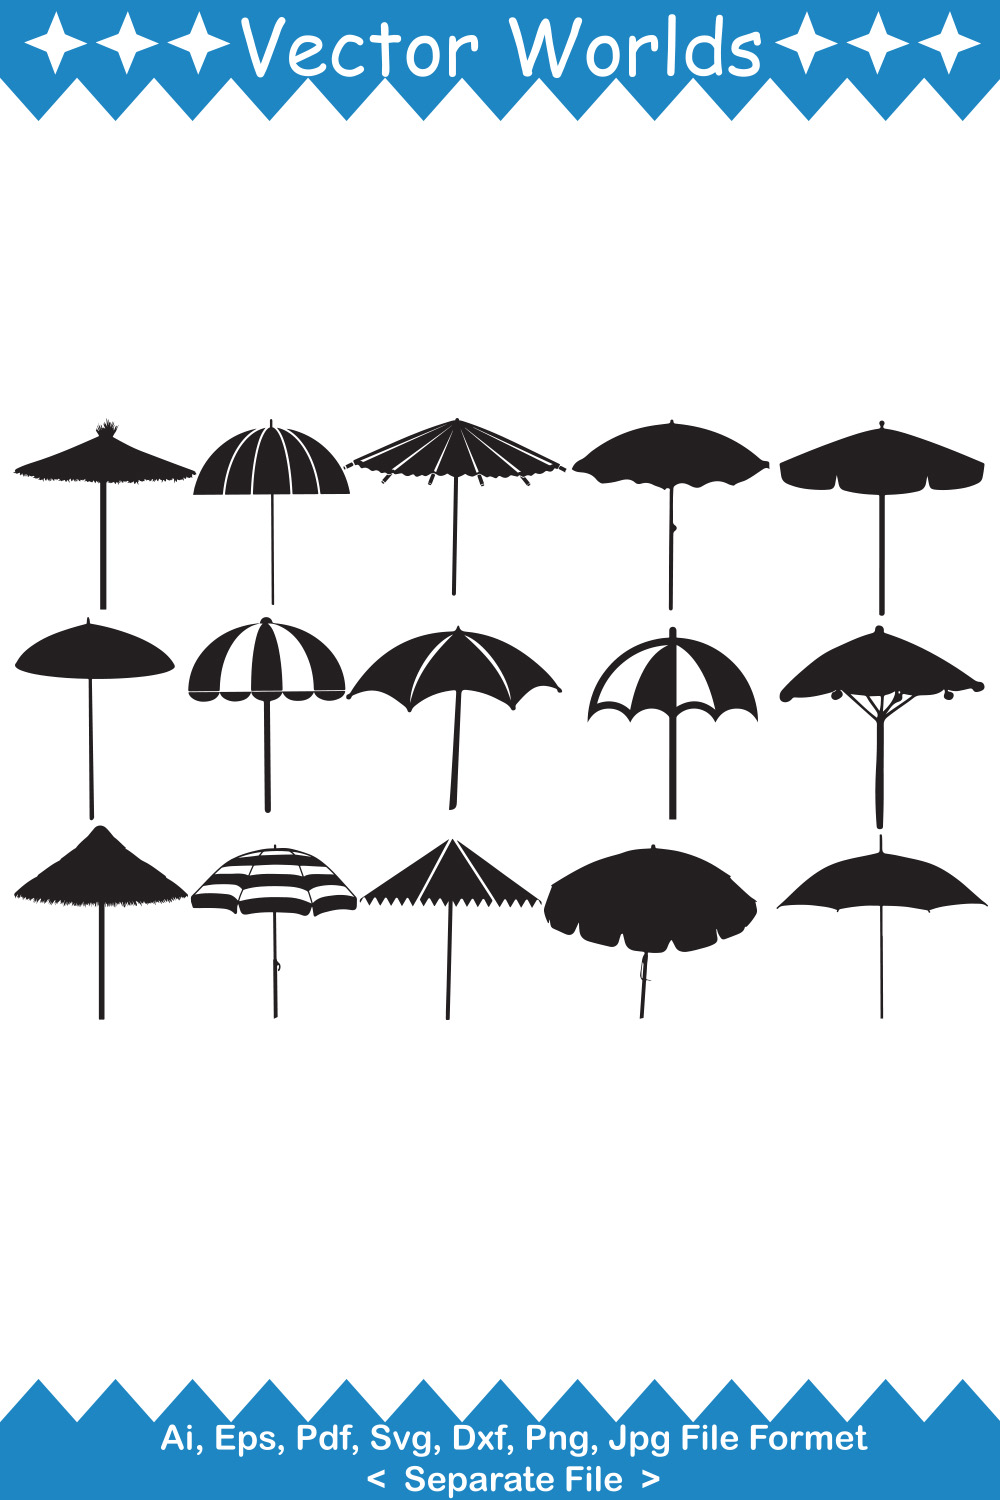 A pack of vector adorable images of beach umbrellas in black.